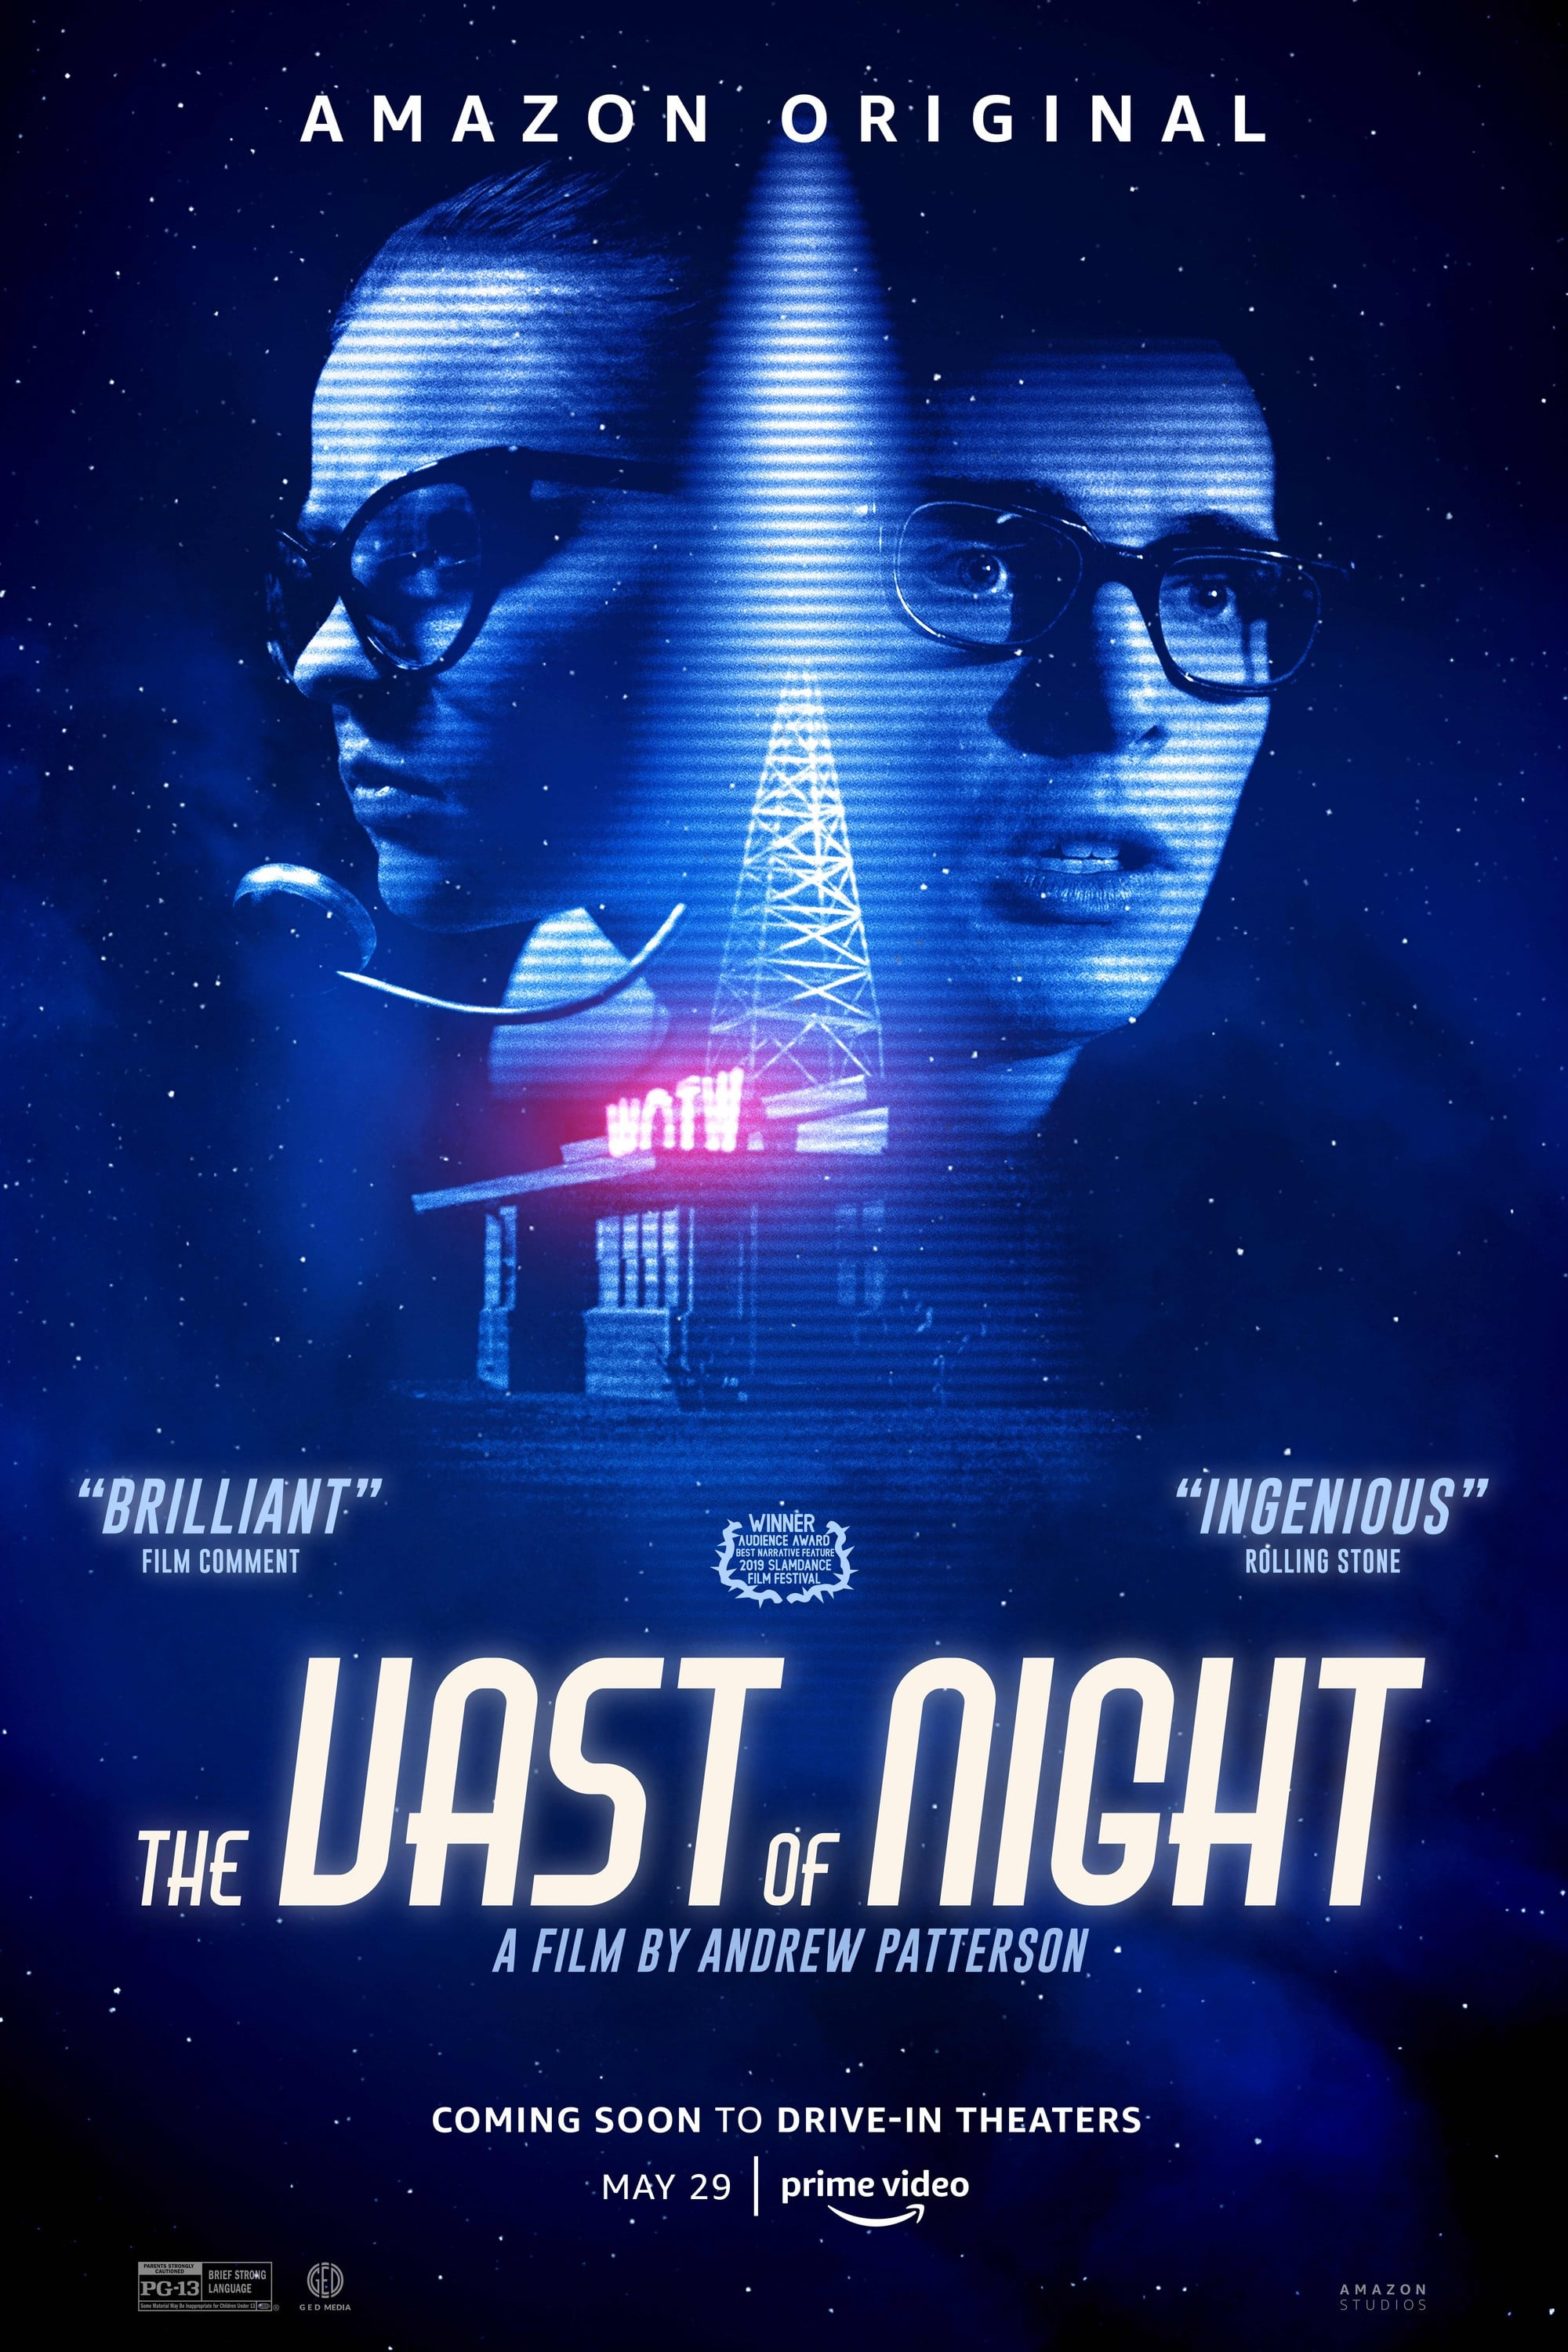 Poster for the movie "The Vast of Night"